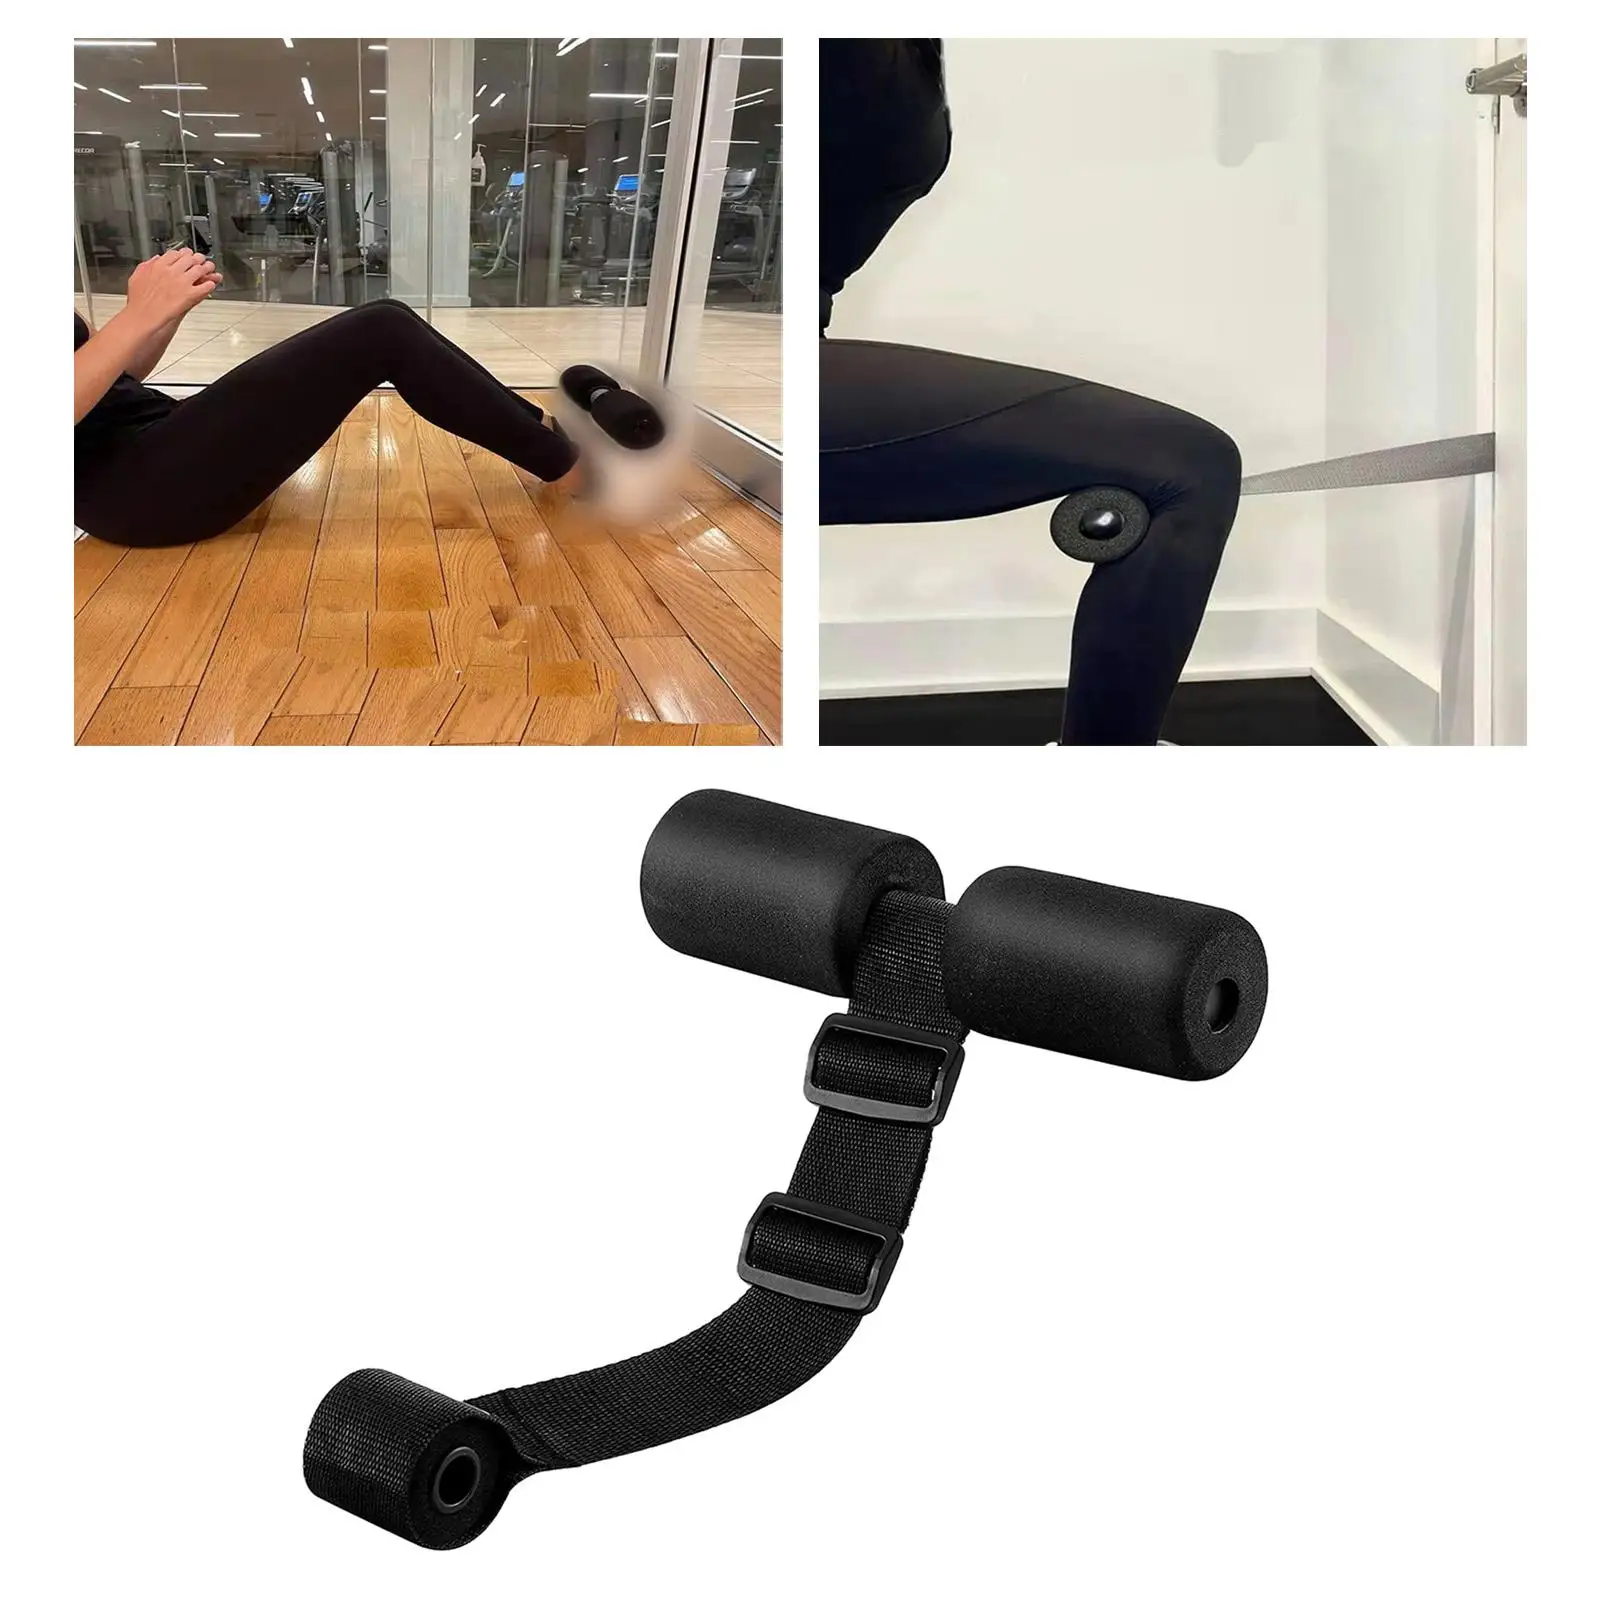 Sit up Assistant Device Padded Foot Holder Home Gym Workout Fitness Portable